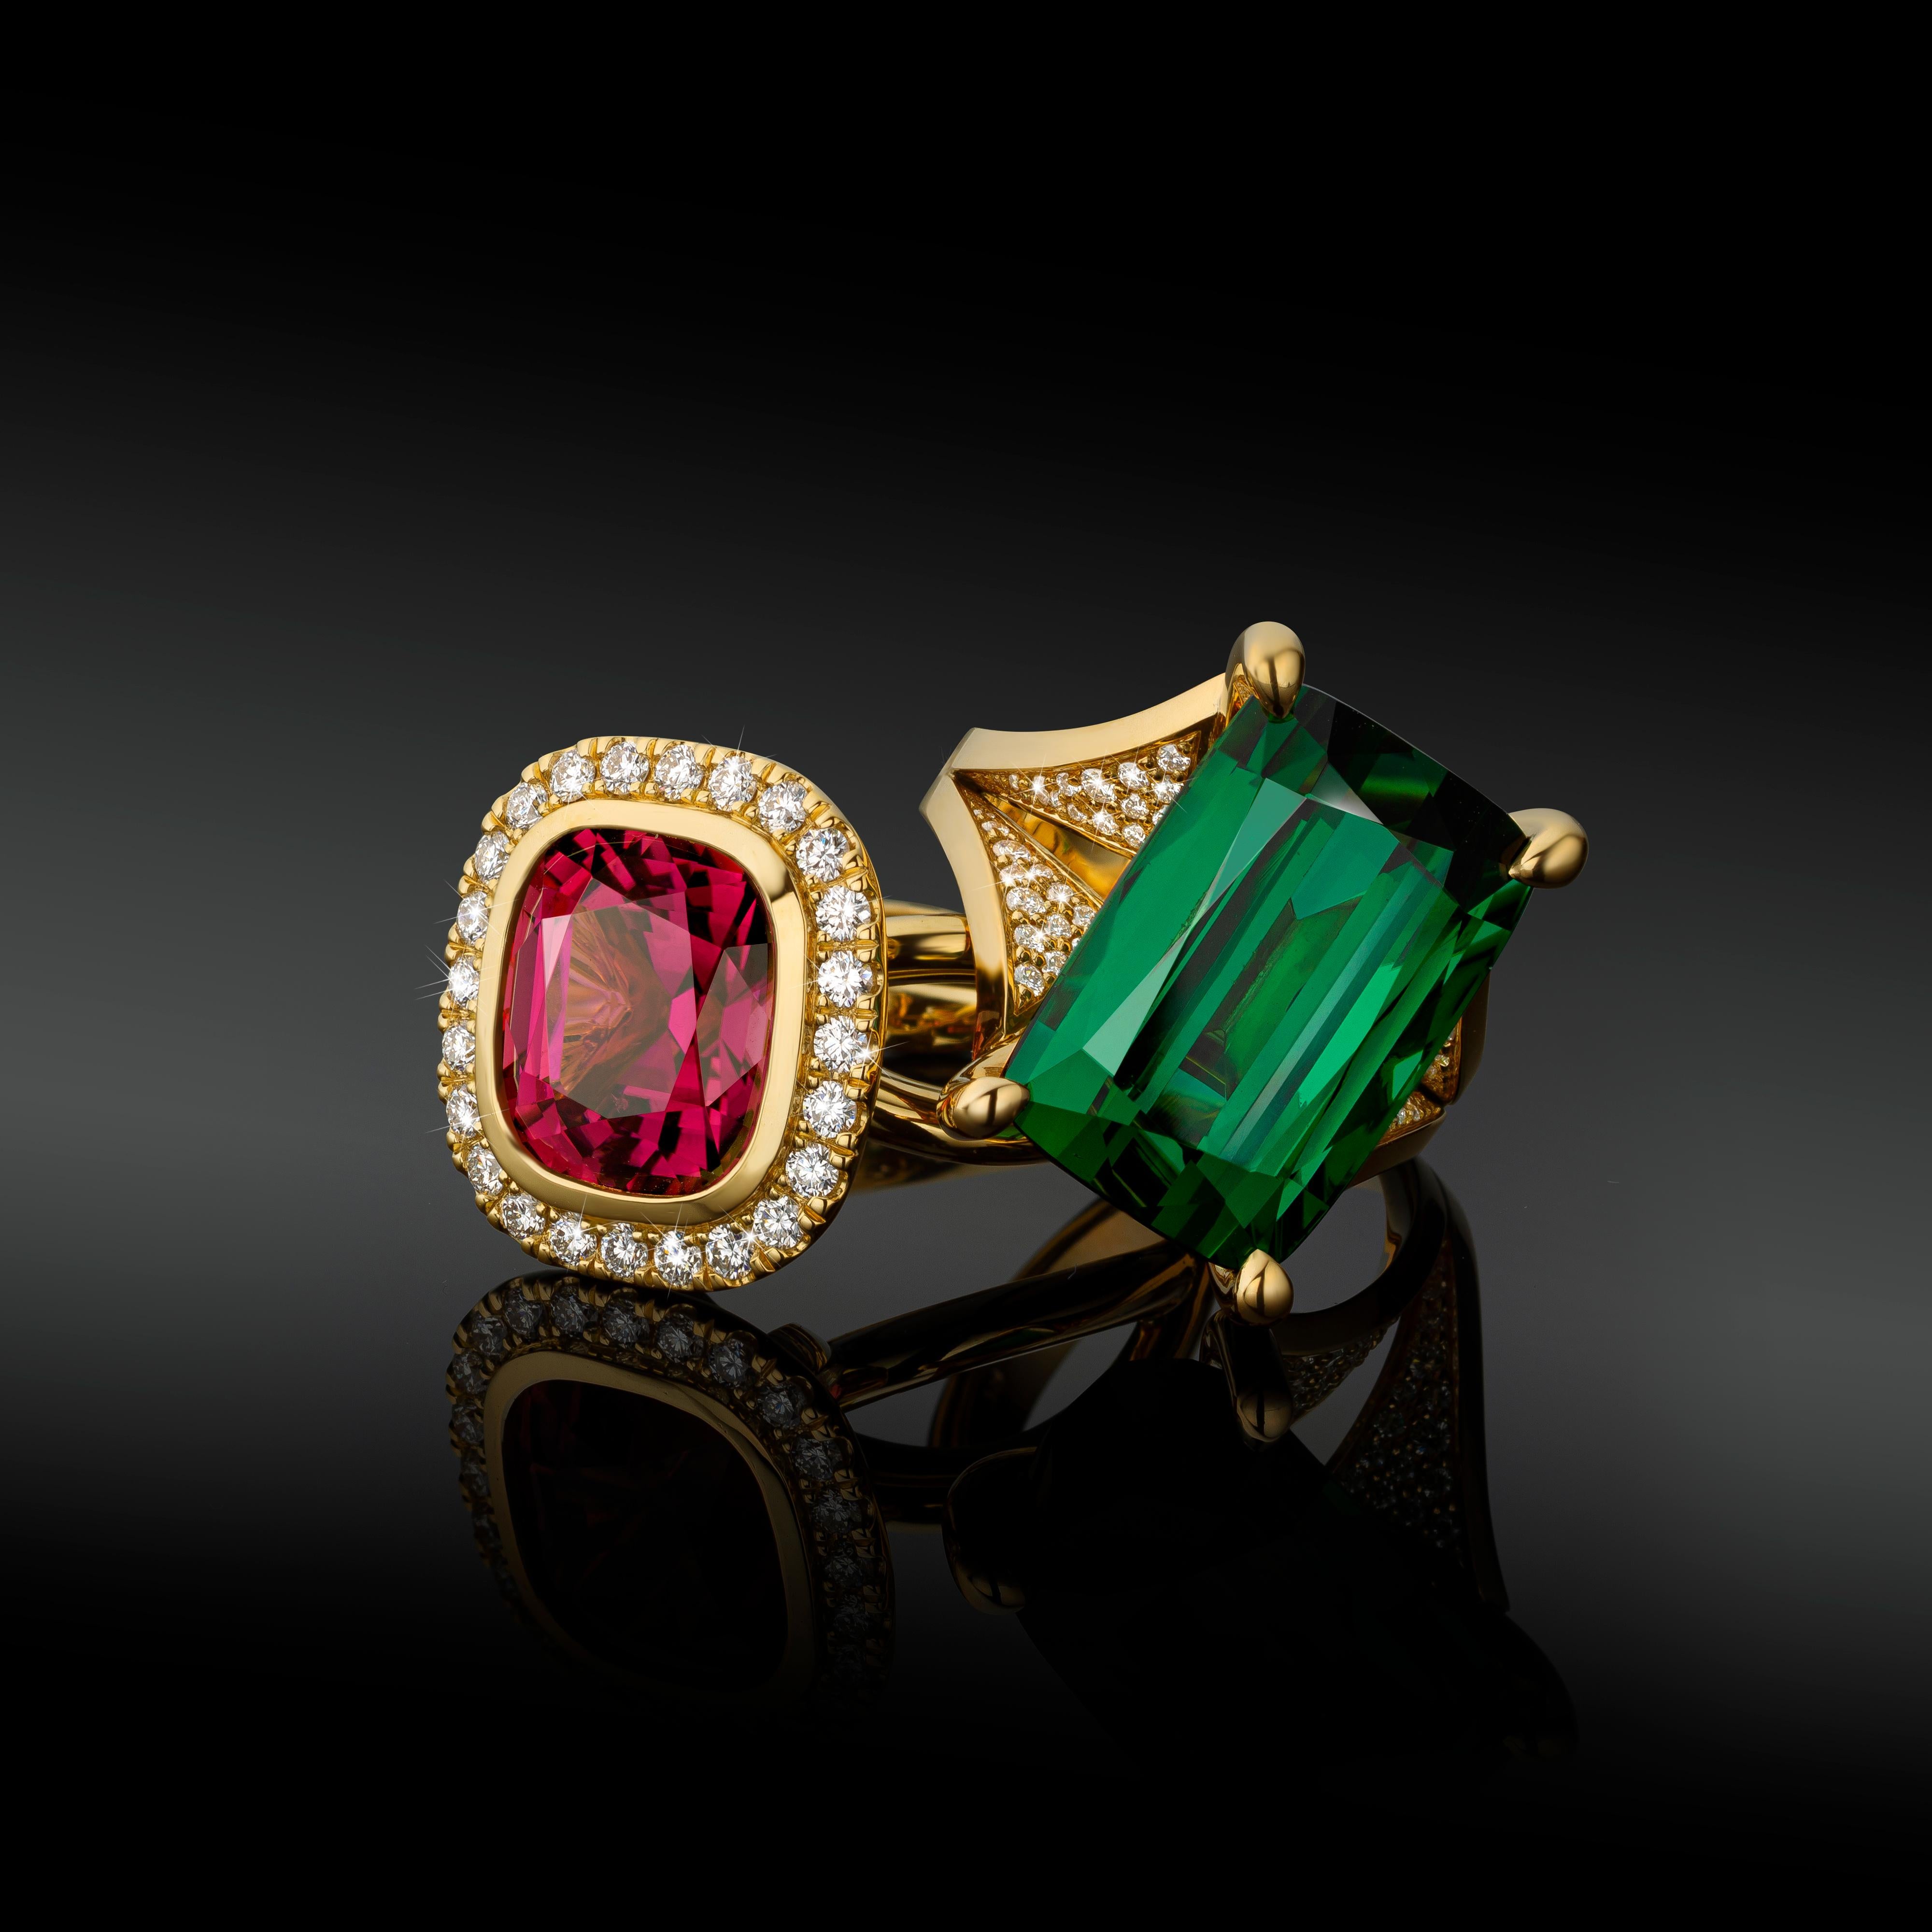 Cober “Playful Pink” with a deep pink Tourmaline and 24 Diamonds YellowGold Ring 2